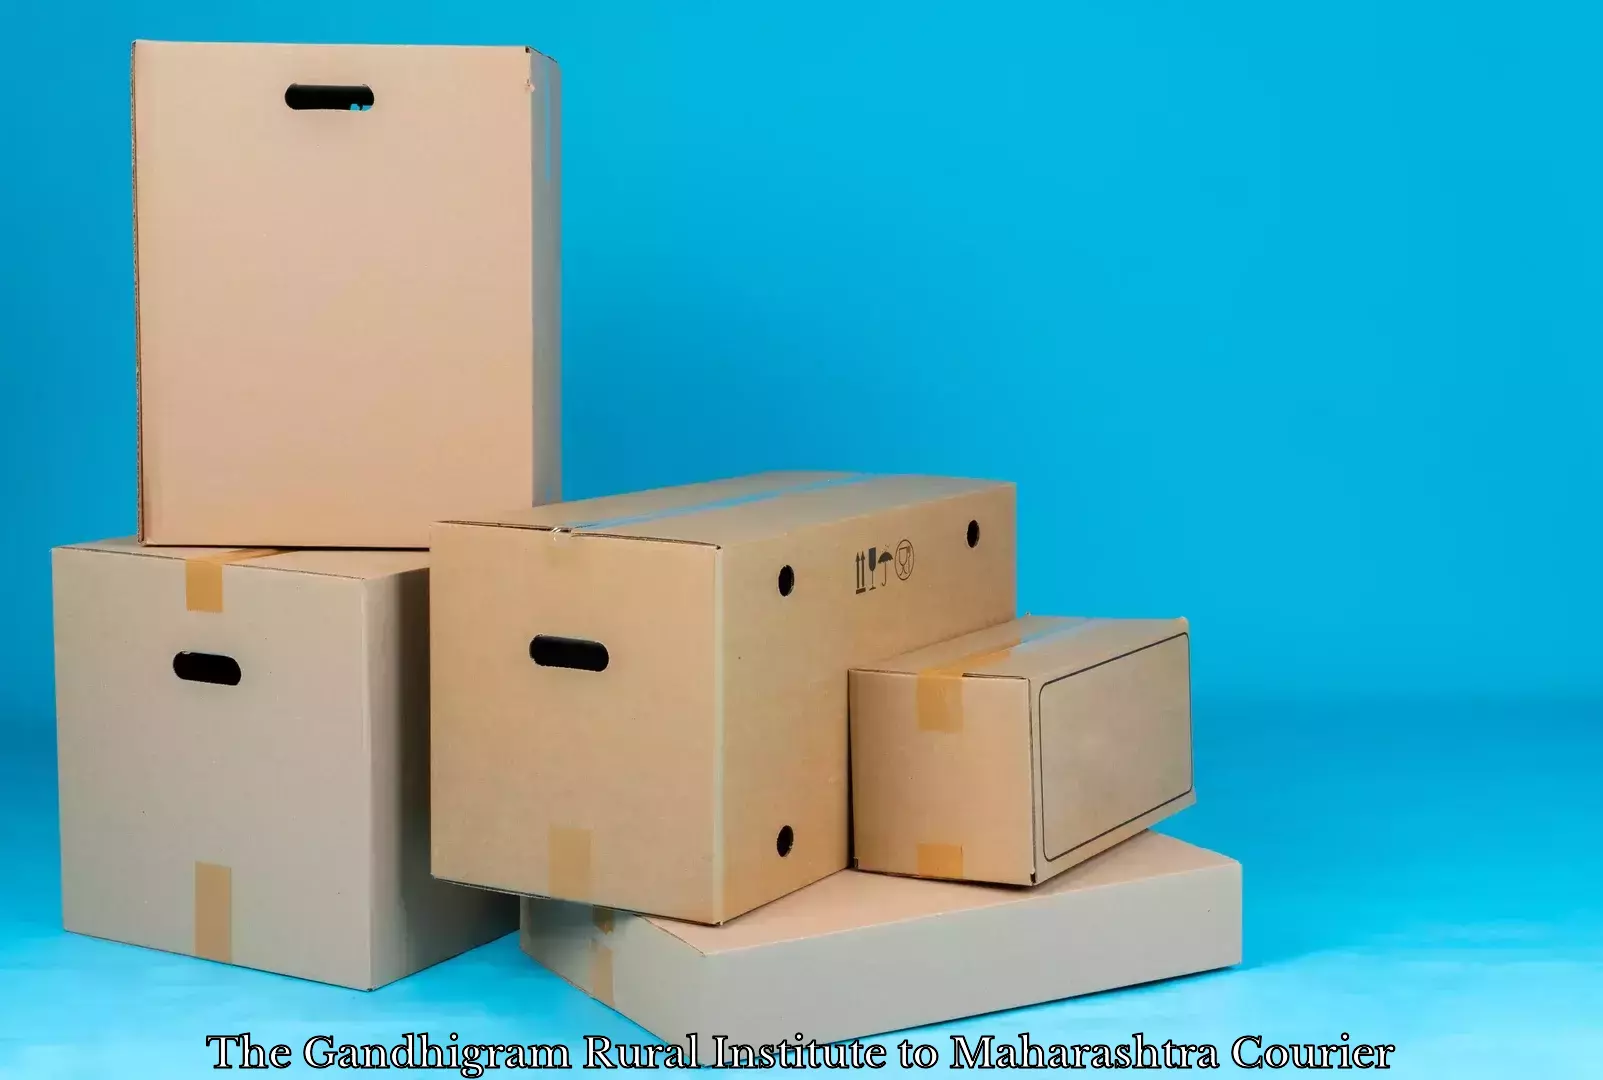 Specialized moving company The Gandhigram Rural Institute to Panvel